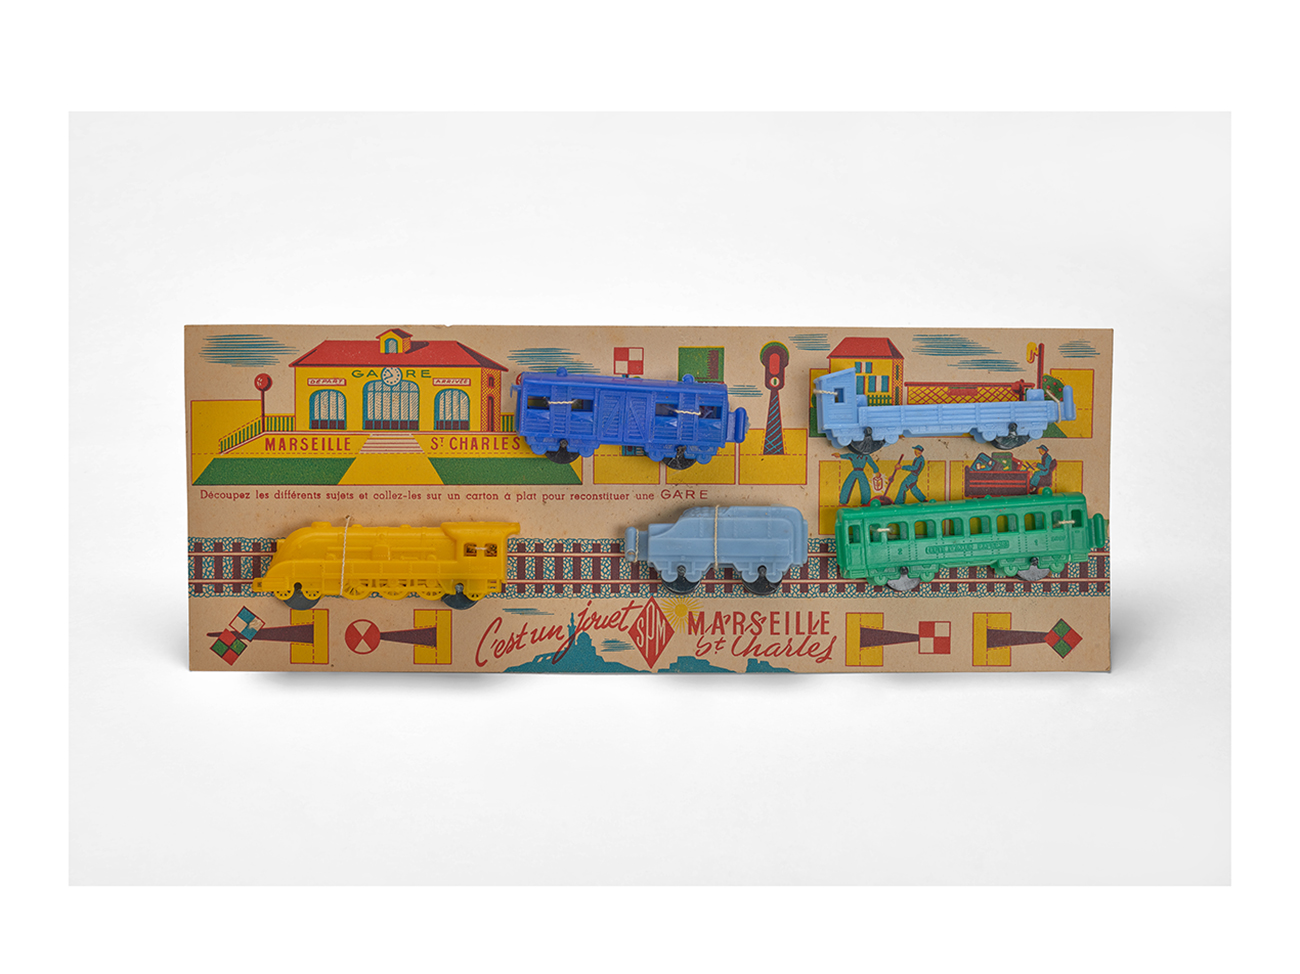 “Marseille St-Charles” locomotive and its carriages fixed on a cardboard station set, manufactured by SPM, 1950s. Plastic train, cardboard box. Massilia Toy, Marseille © Yves Inchierman